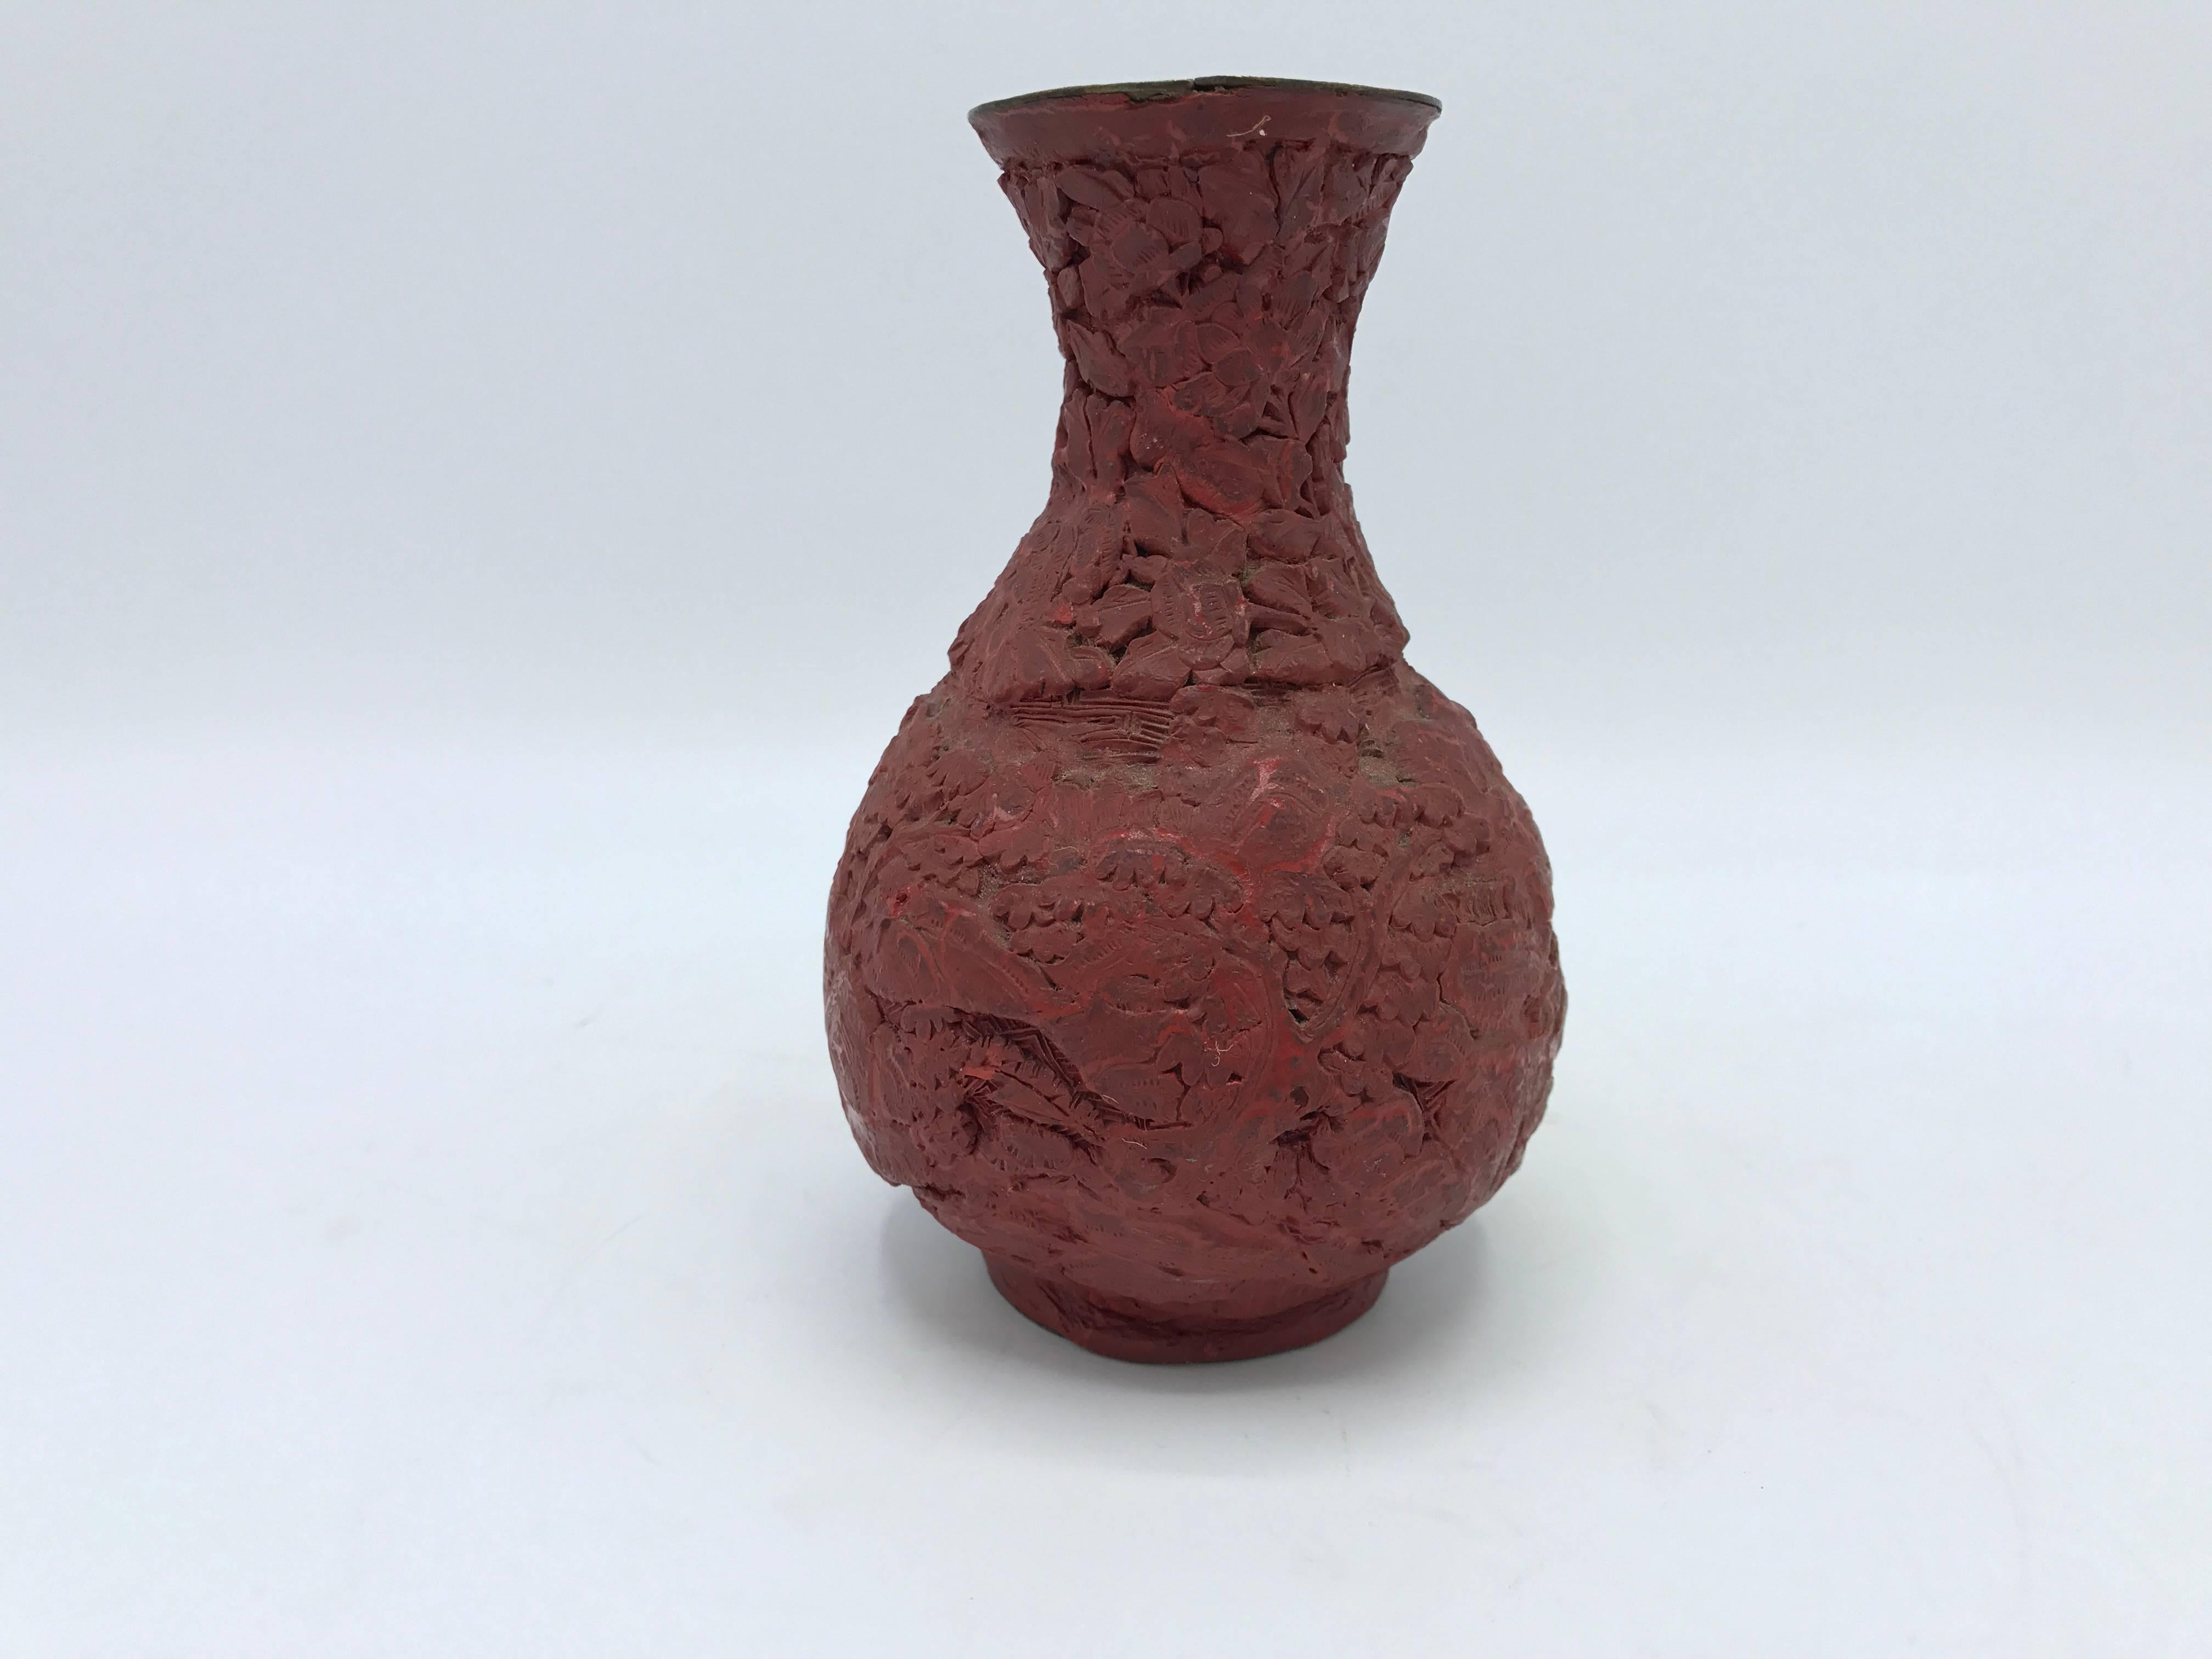 Offered is a gorgeous, 18th-19th century cinnabar vase with a floral motif. The piece is in great condition for its age, with minor wear. The allover design is slightly faint and lacking detail, as expected with a piece of this era.